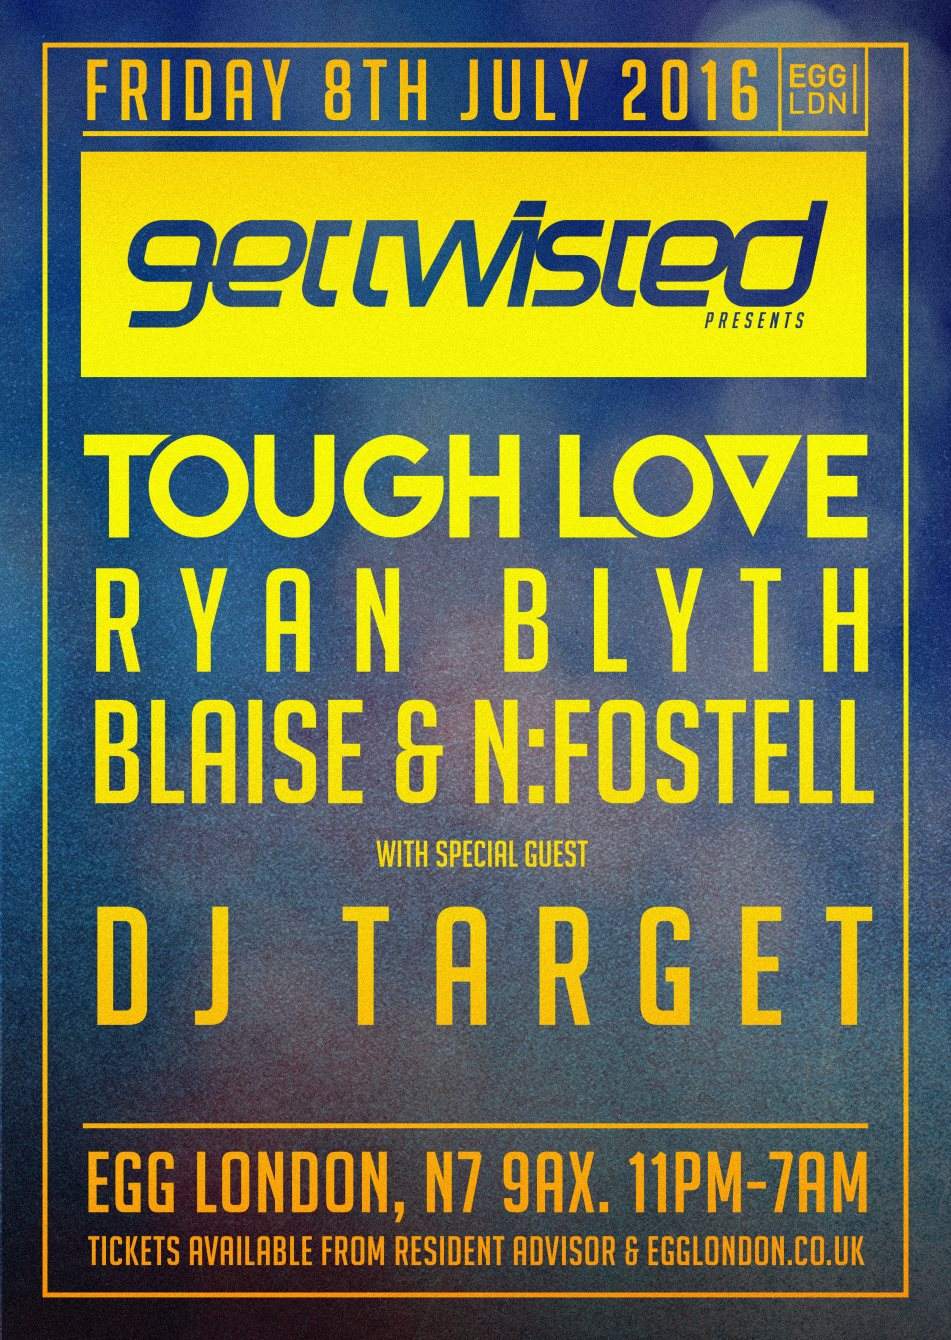 Tough Love presents Get Twisted with DJ Target, Ryan Blyth, Blaise and More - フライヤー表